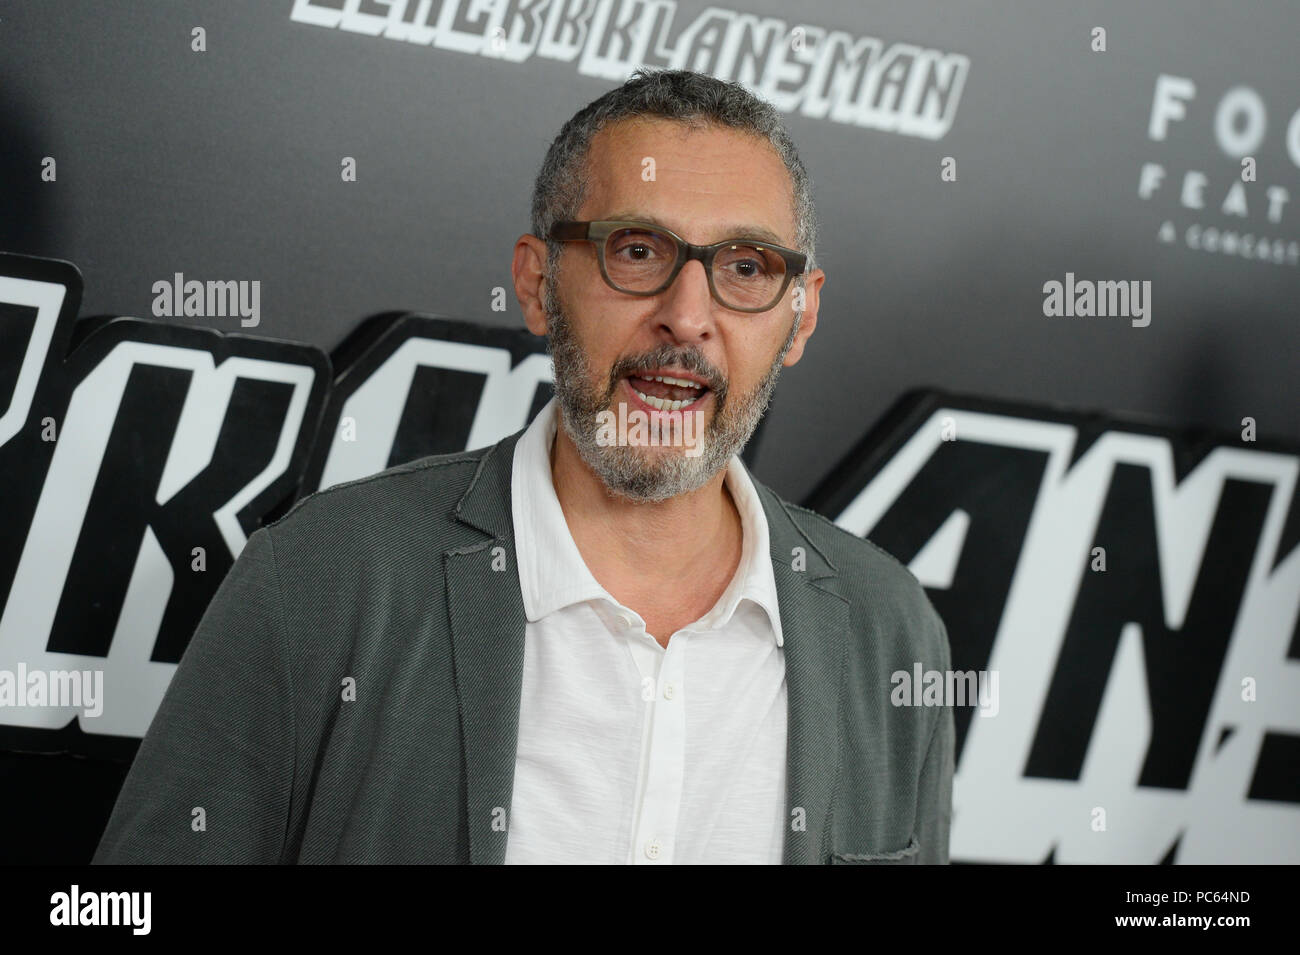 John Turturro attends New York Premiere Of 'BlacKkKlansman' at Brooklyn Academy of Music on July 30, 2018 in New York City. Stock Photo